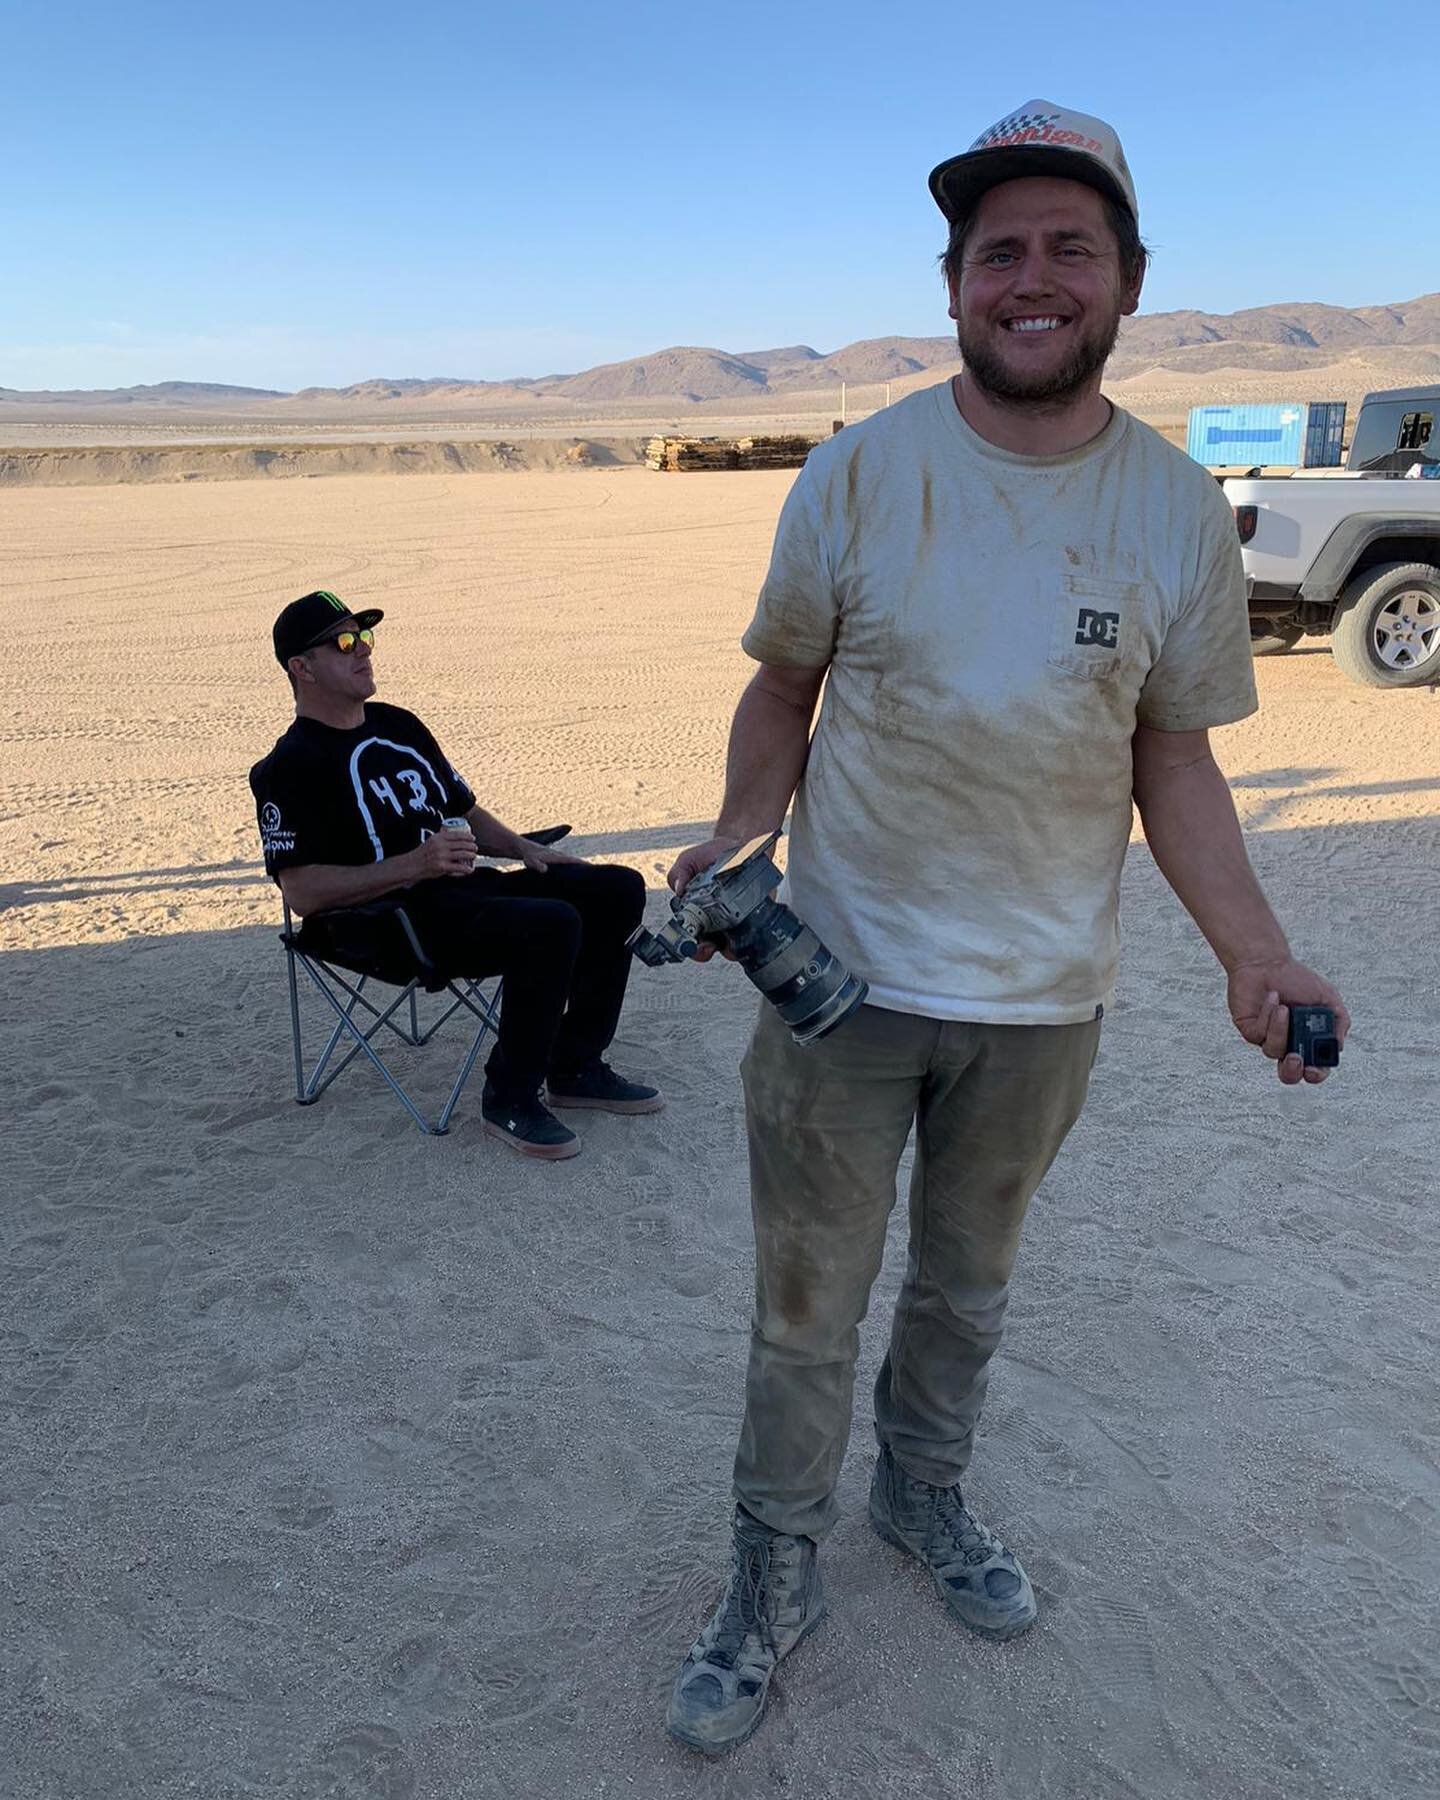 On my birthday last year, we filmed a big TRX video with @kblock43 . He photobombed my birthday picture!! We all had a lot of awesome (and insane) times working with Ken. I felt like we were just getting started when it all ended so suddenly.

BTS ph